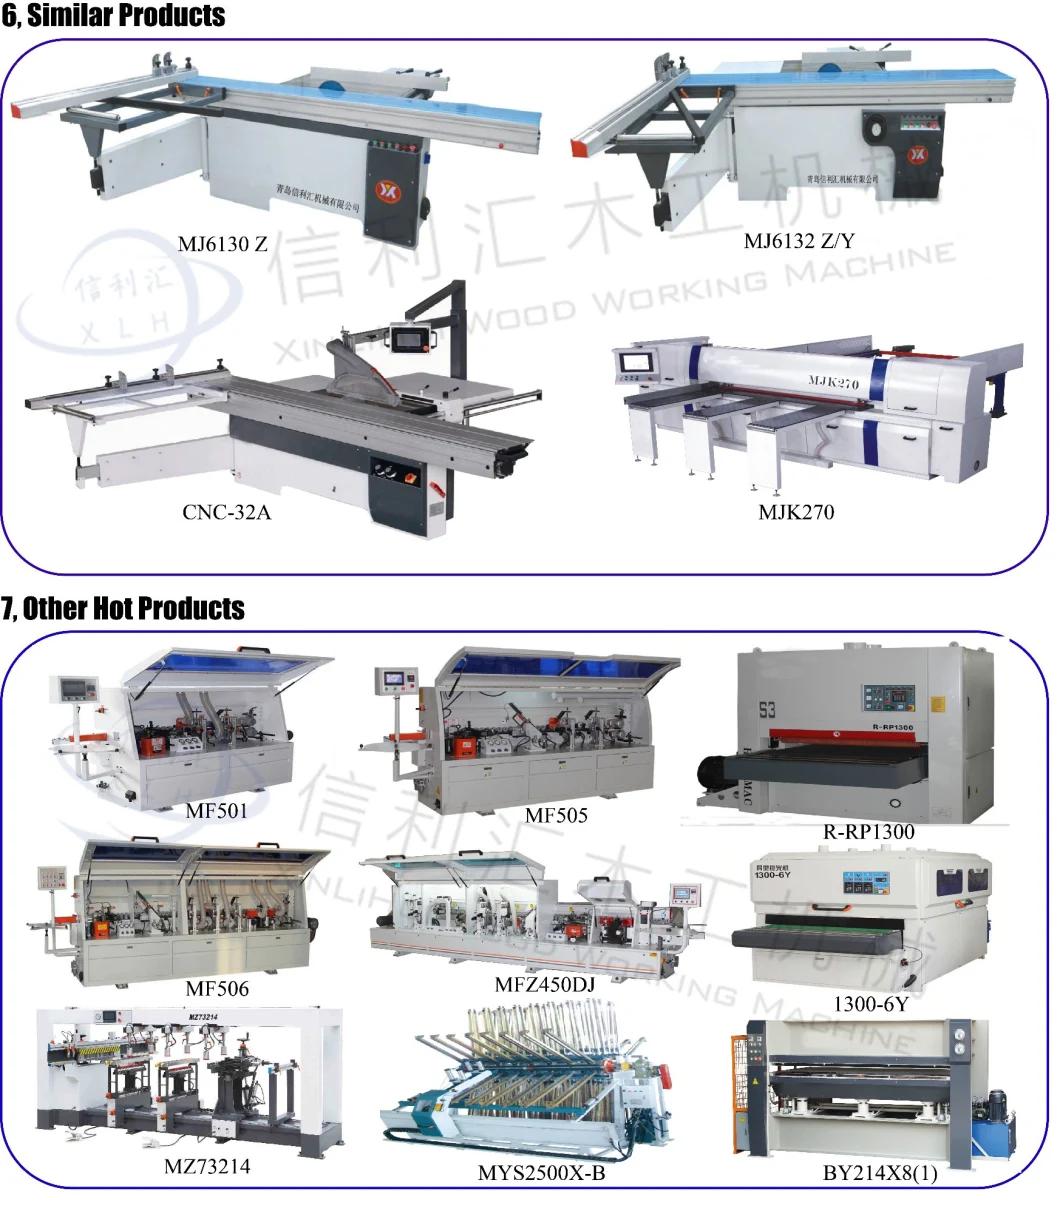 Working Length 2800mm Hot Sell Sliding Table Saw Factory Direct Supply Wood Core Slicing Machine Double Column Horizontal Cutting Saw